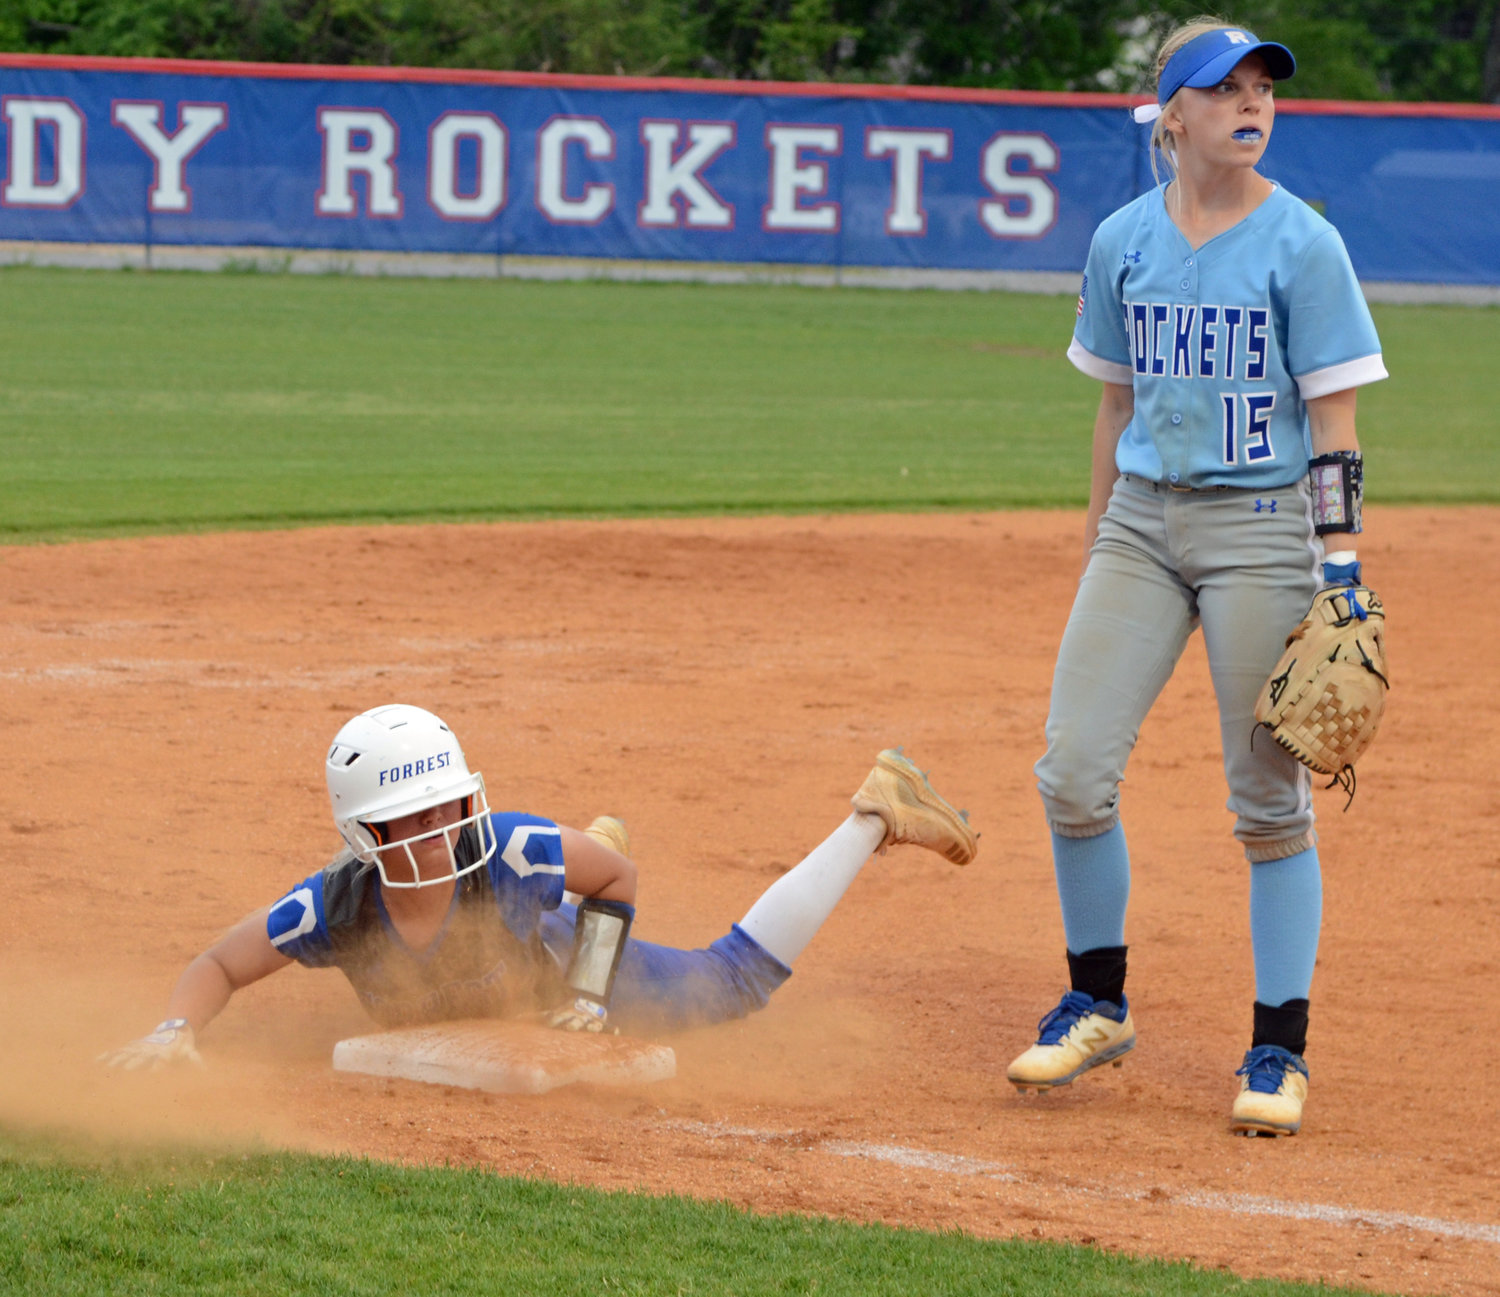 Briley Burnham, who had two RBIs and two runs scored, steals third base in the bottom of the fourth inning.